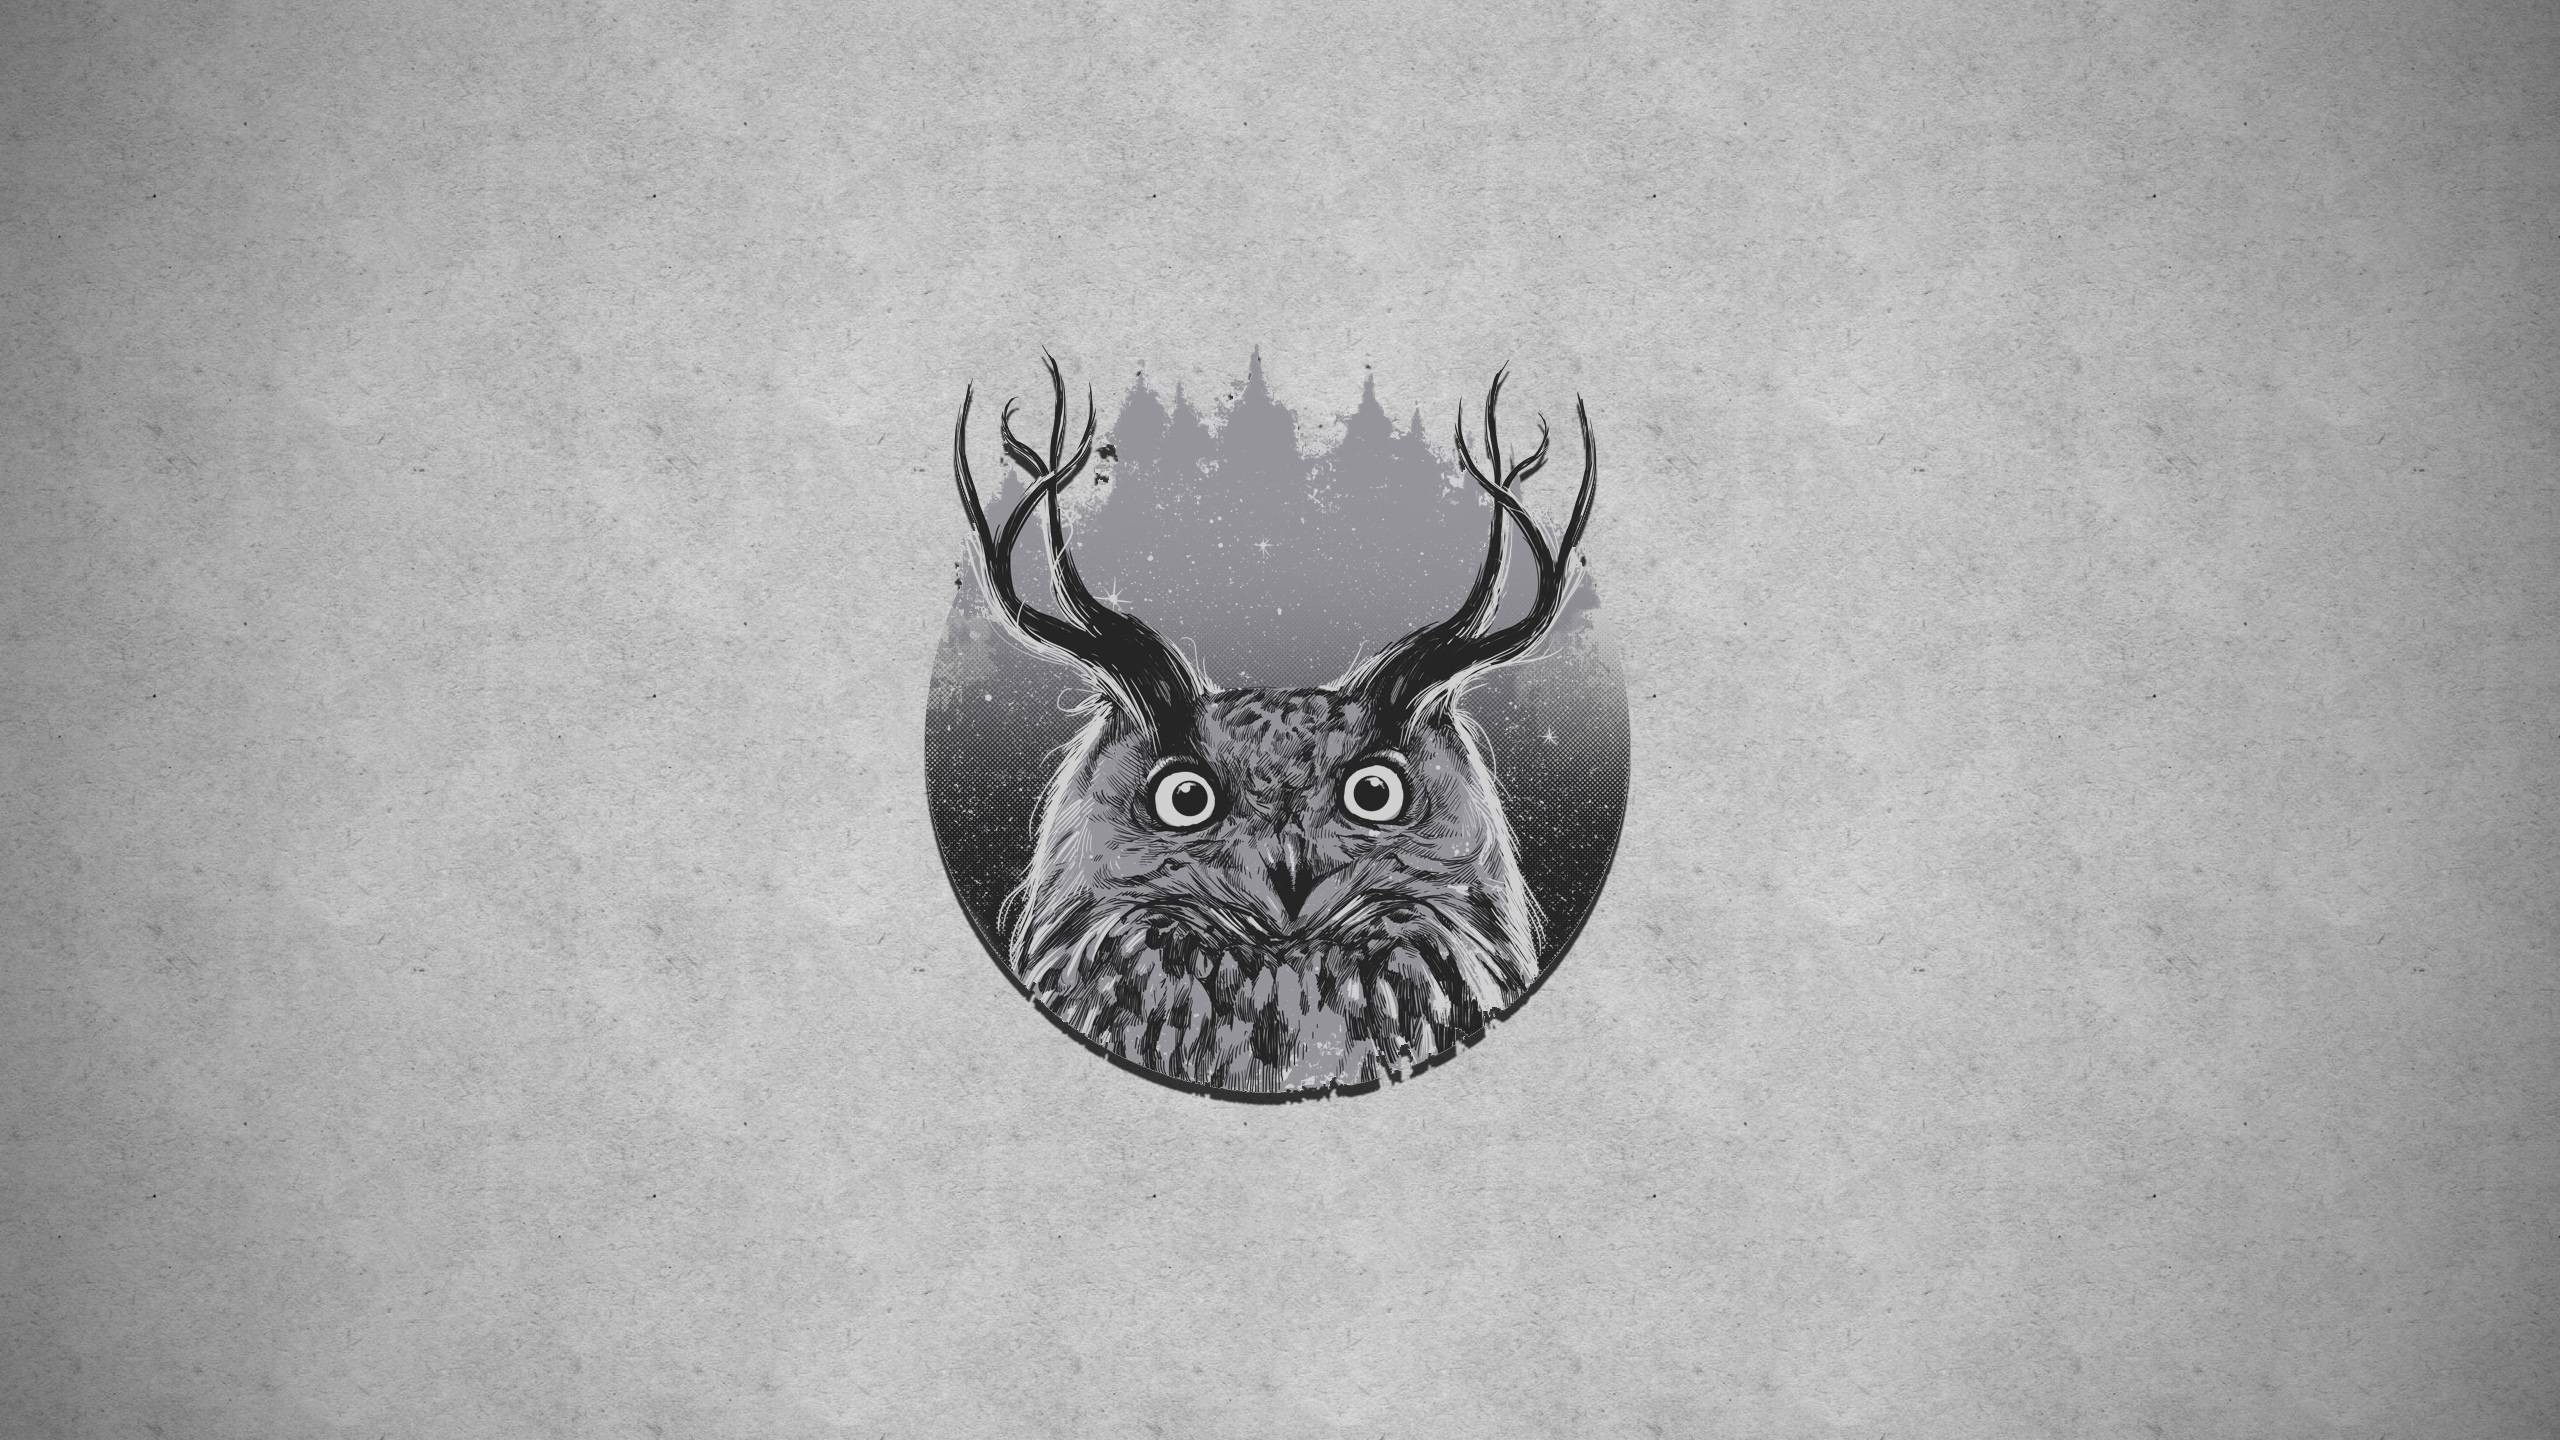 General 2560x1440 artwork owl antlers gray gray background